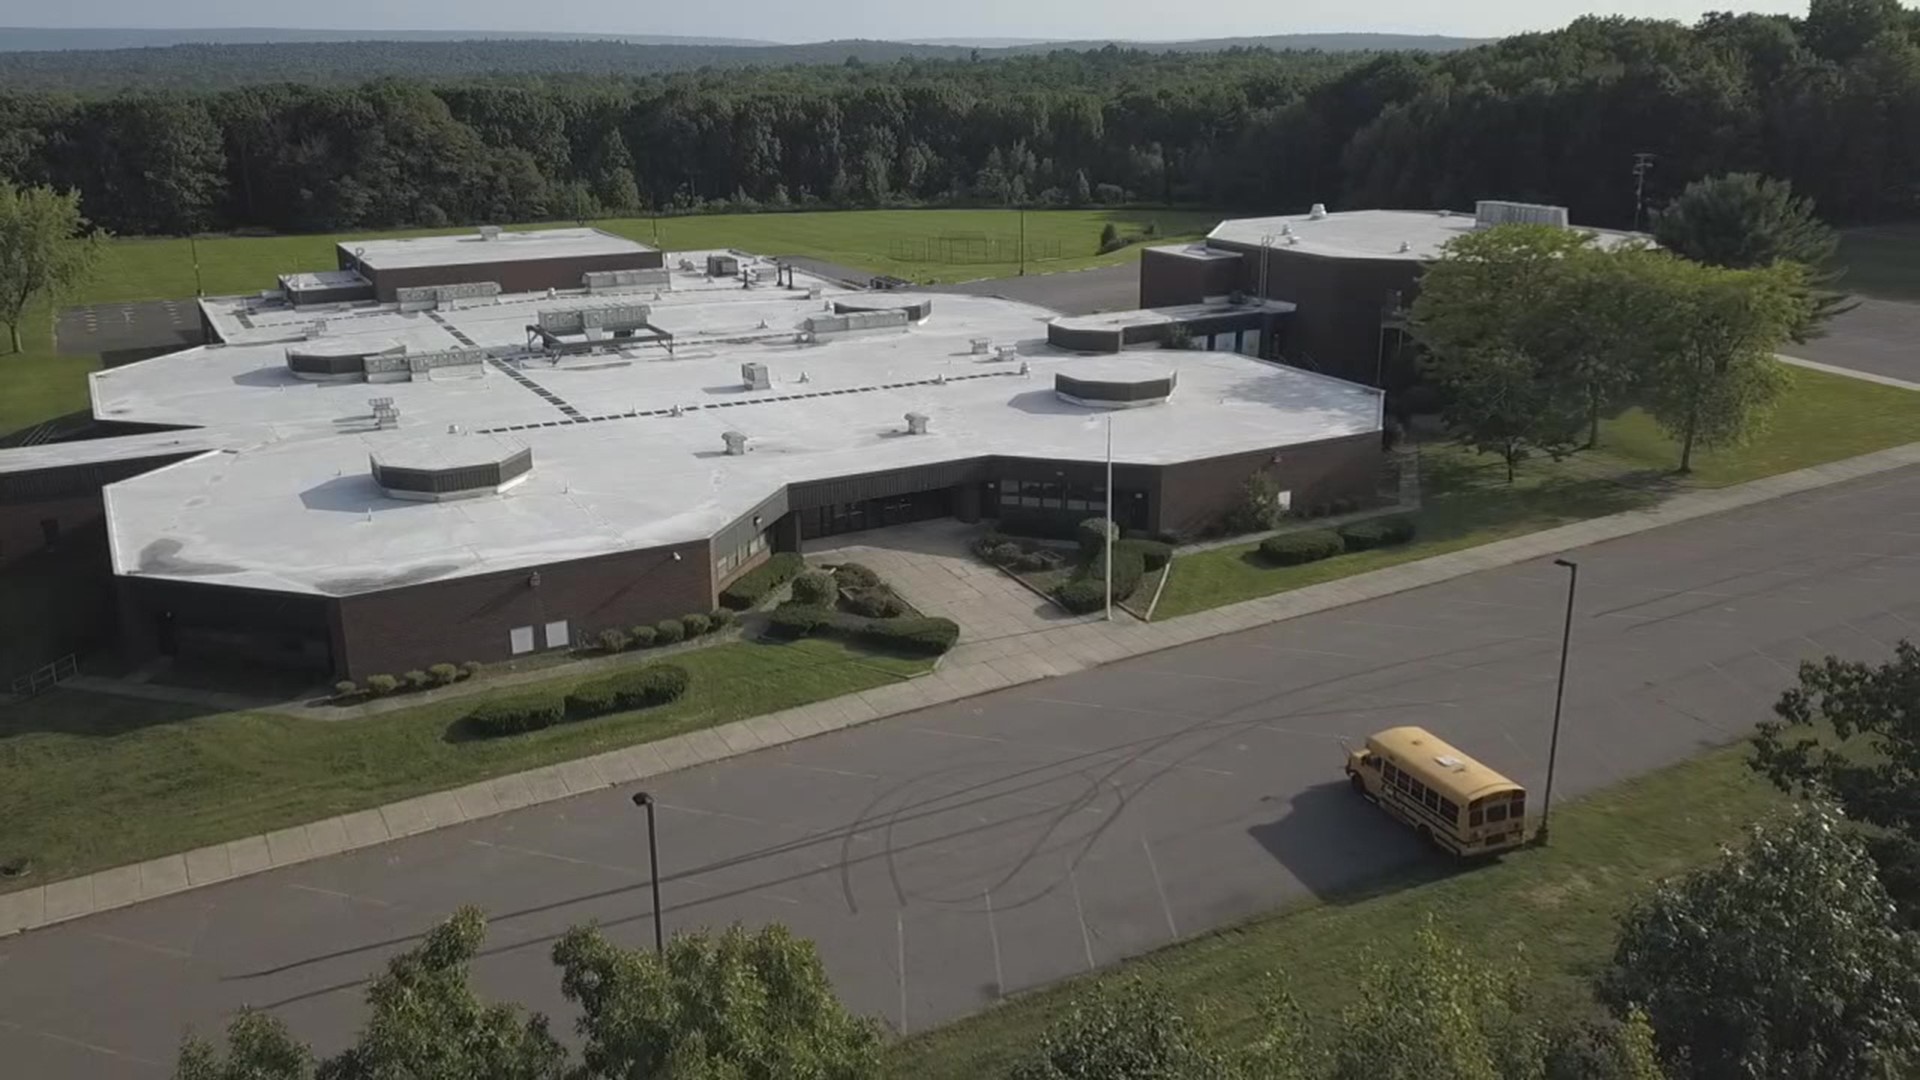 Core 5 withdrew its application to purchase Pocono Elementary Center.